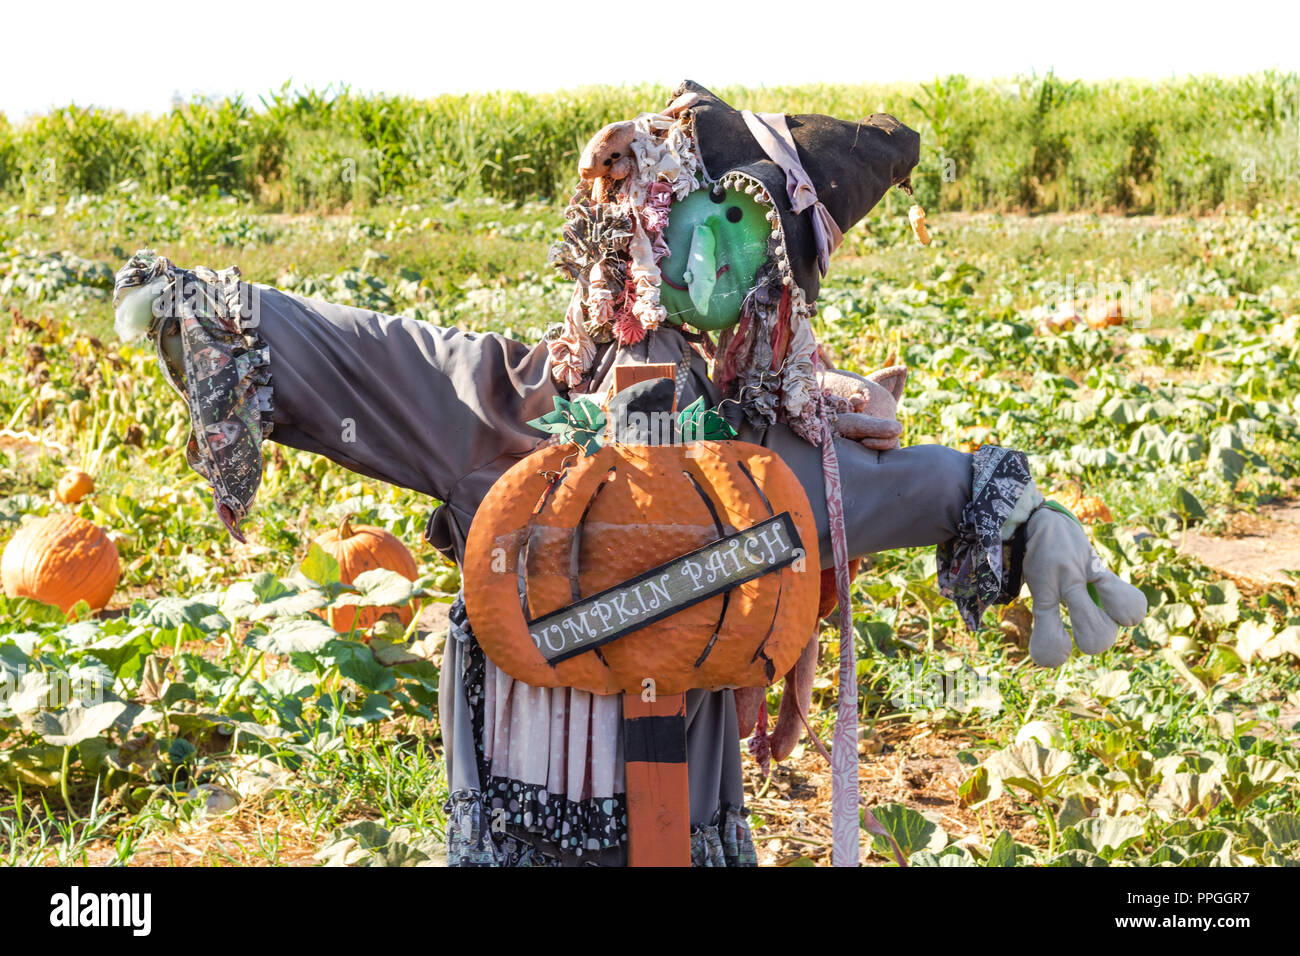 Halloween party celebration with a close up of a fun friendly green face witch scarecrow in a pumpkin patch with pumpkin patch sign standing in a pump Stock Photo